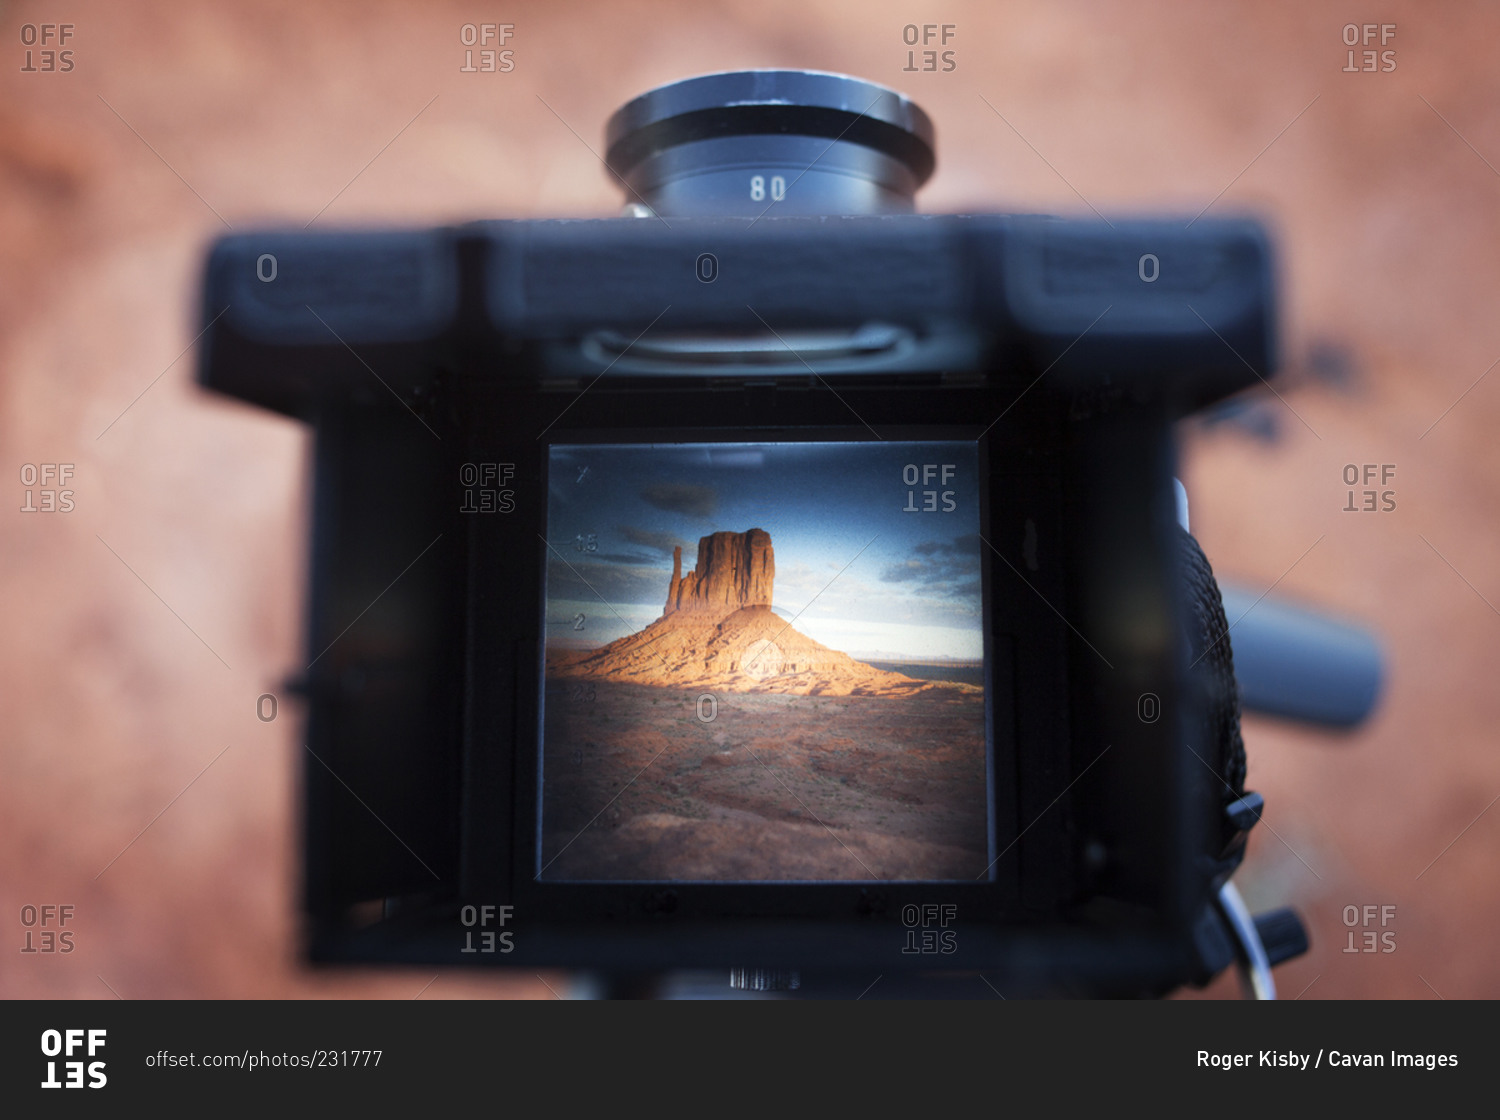 Monument Valley seen in a camera